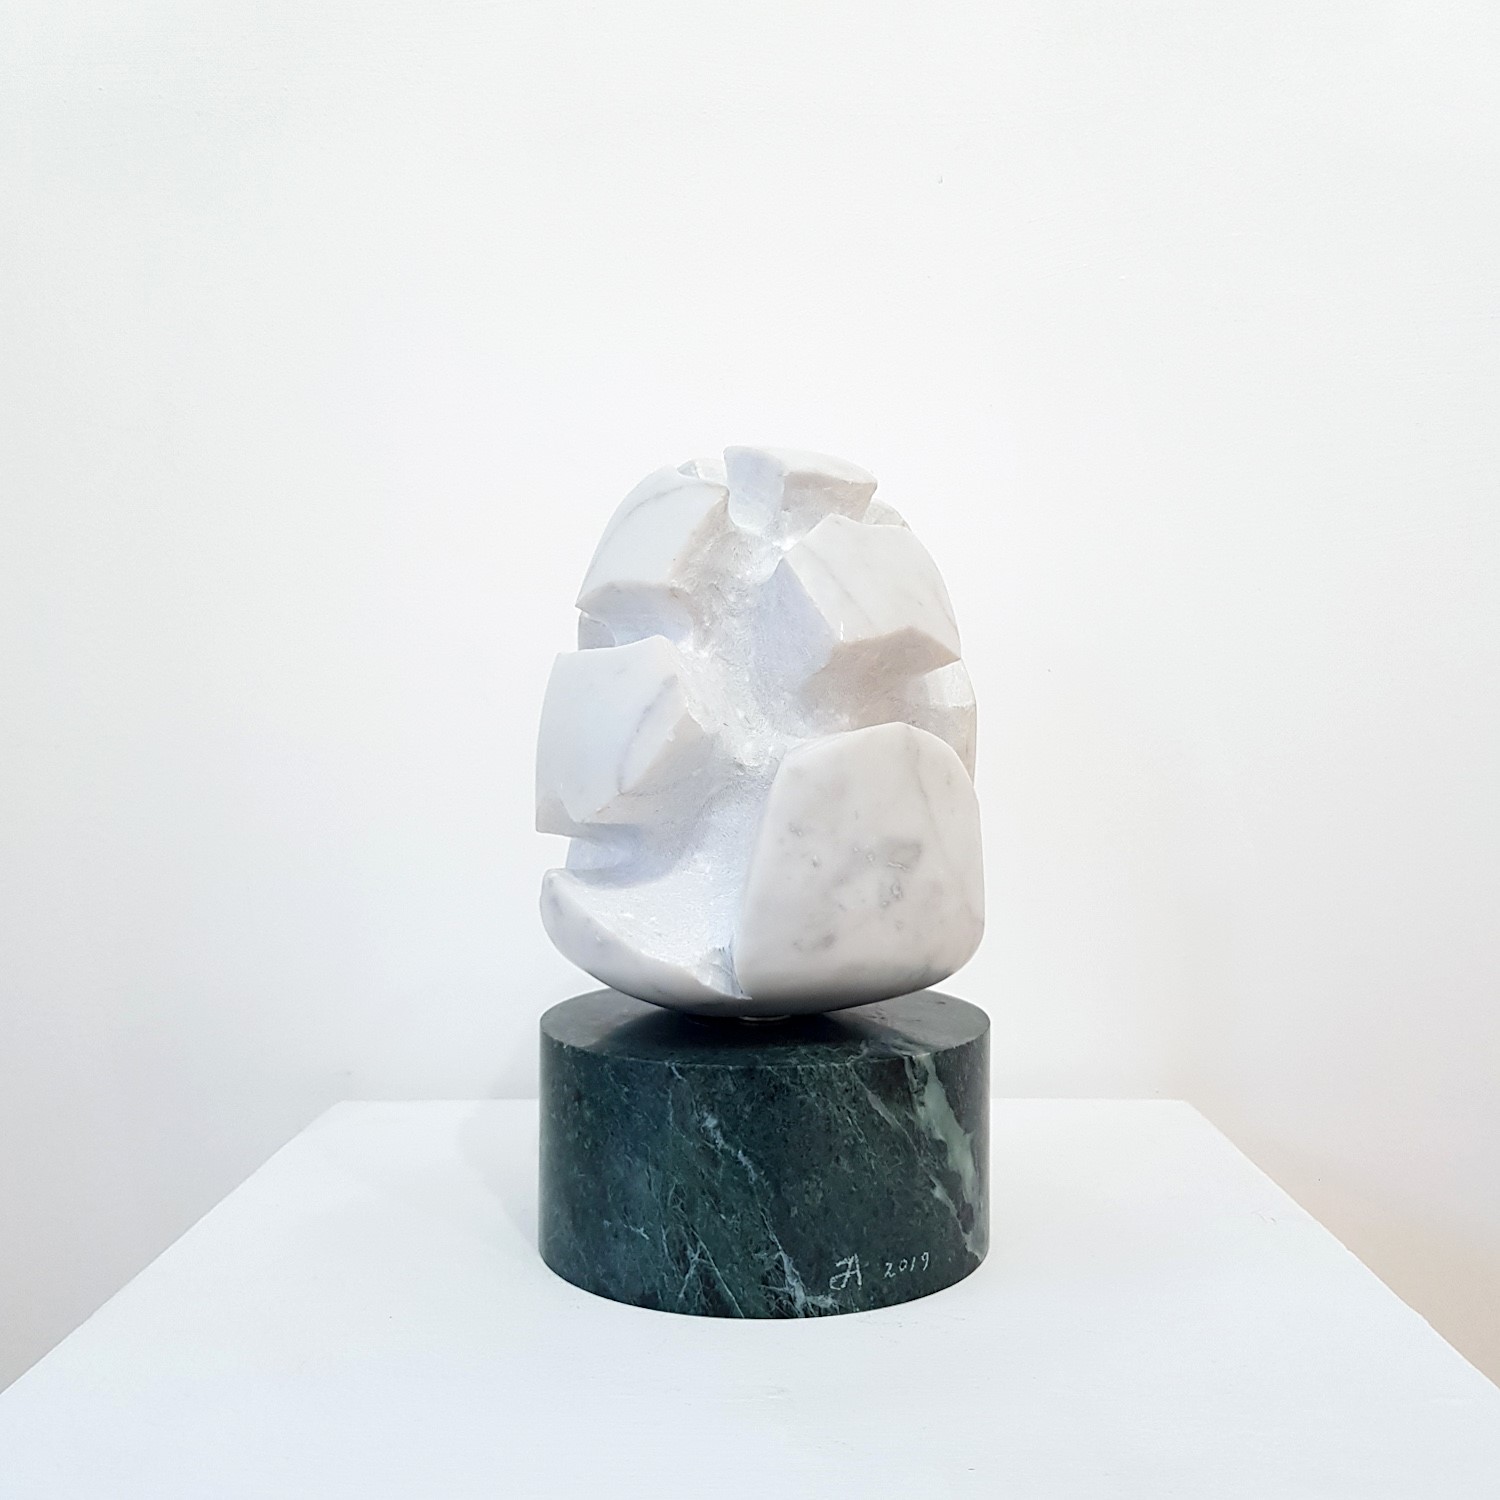 'Opening Pinecone | Carrara Marble' by artist Tom Allan